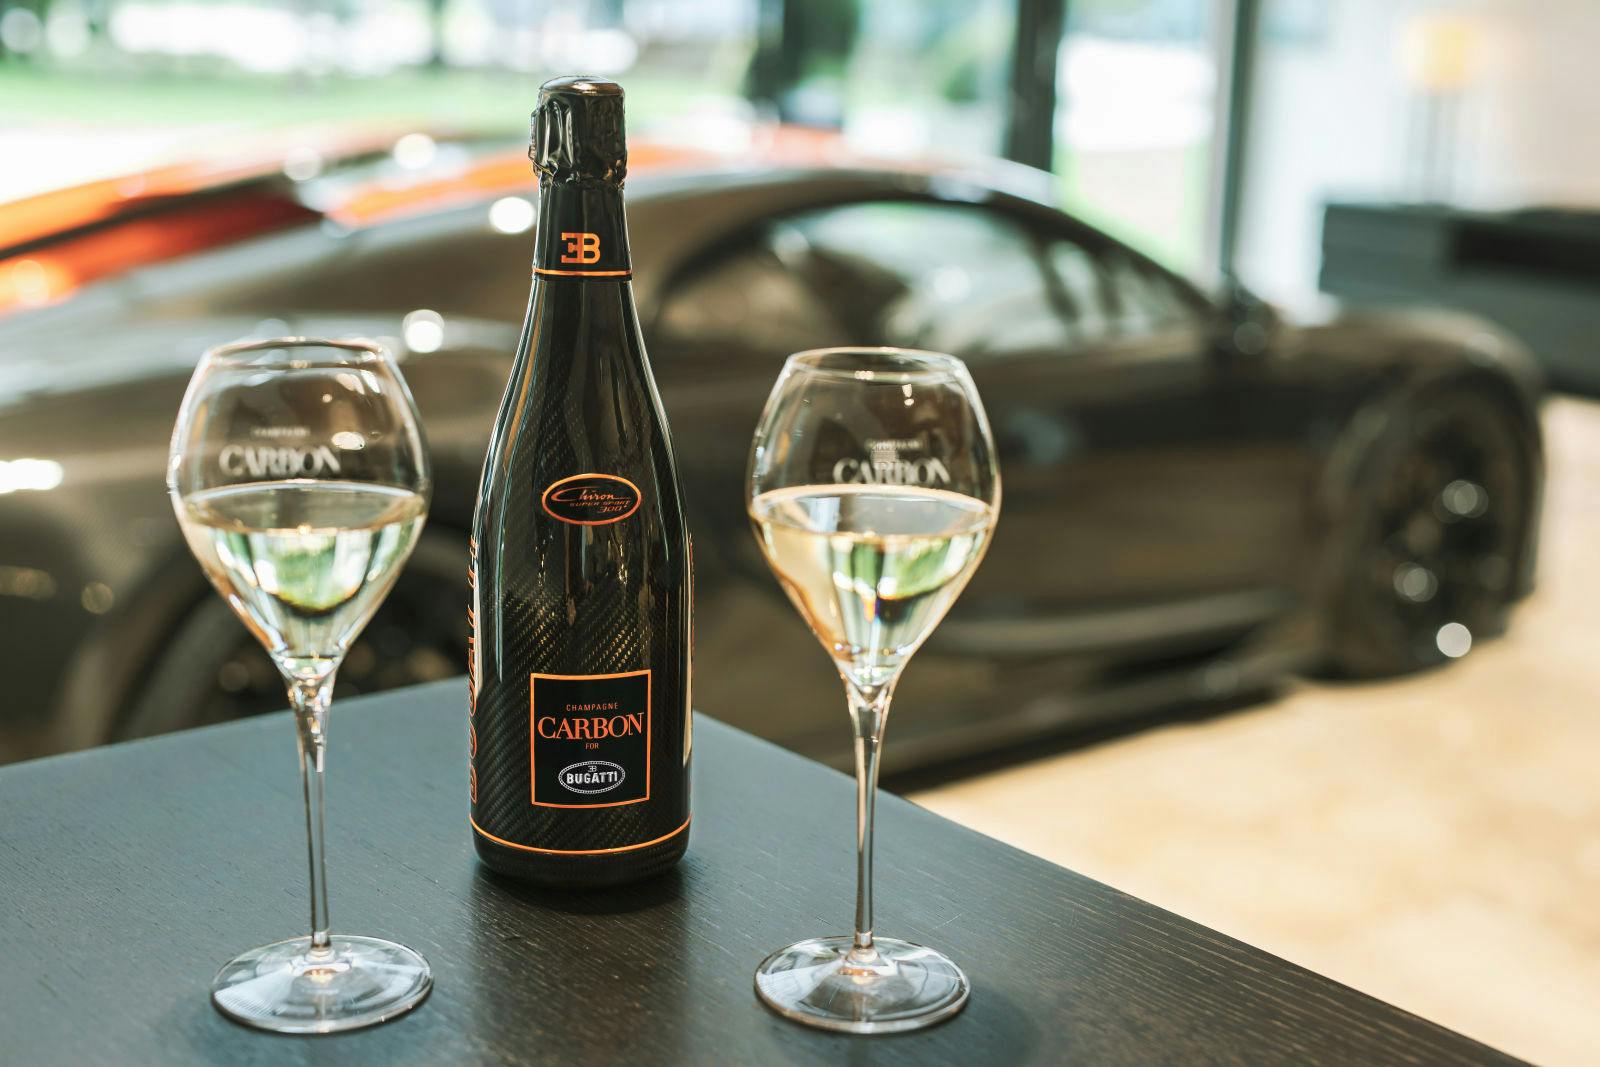 An exceptional vehicle and an exceptional champagne: the Bugatti Chiron Super Sport 300+ and the Carbon EB.02 Chiron 300+ in the Bugatti Customer Lounge at the brand's headquarters in Molsheim.